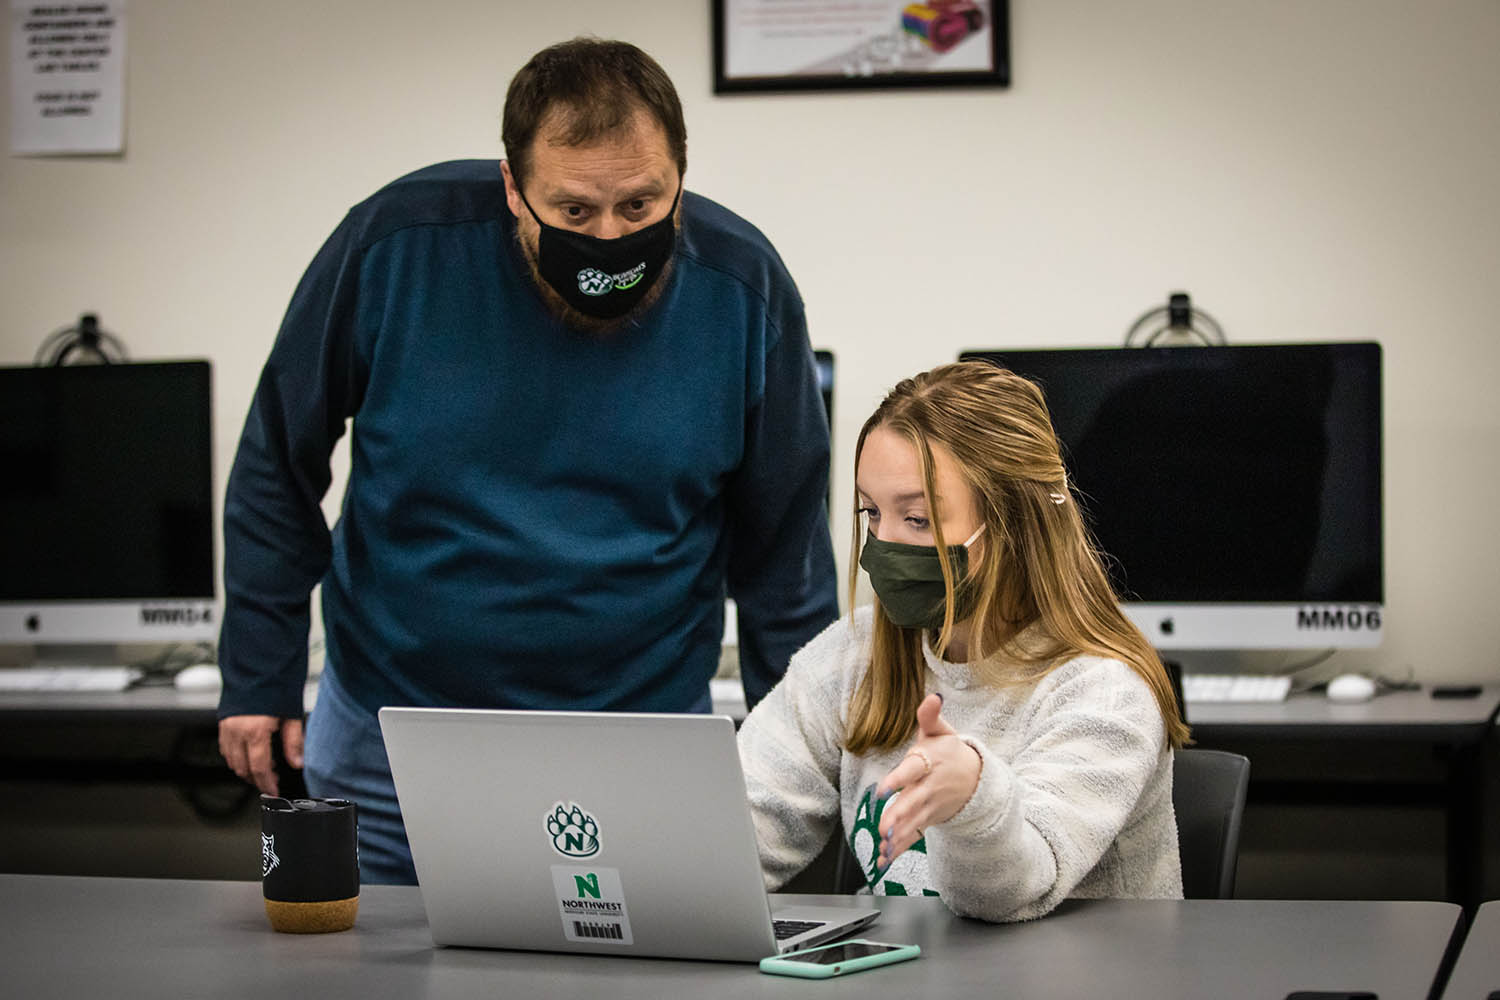 Northwest provides students with tools they can use to succeed in and out of the classroom. Textbooks and a laptop are provided as part of students' tuition costs, saving students an estimated $7,200 over four years. (Photo by Brandon Bland/Northwest Missouri State University)